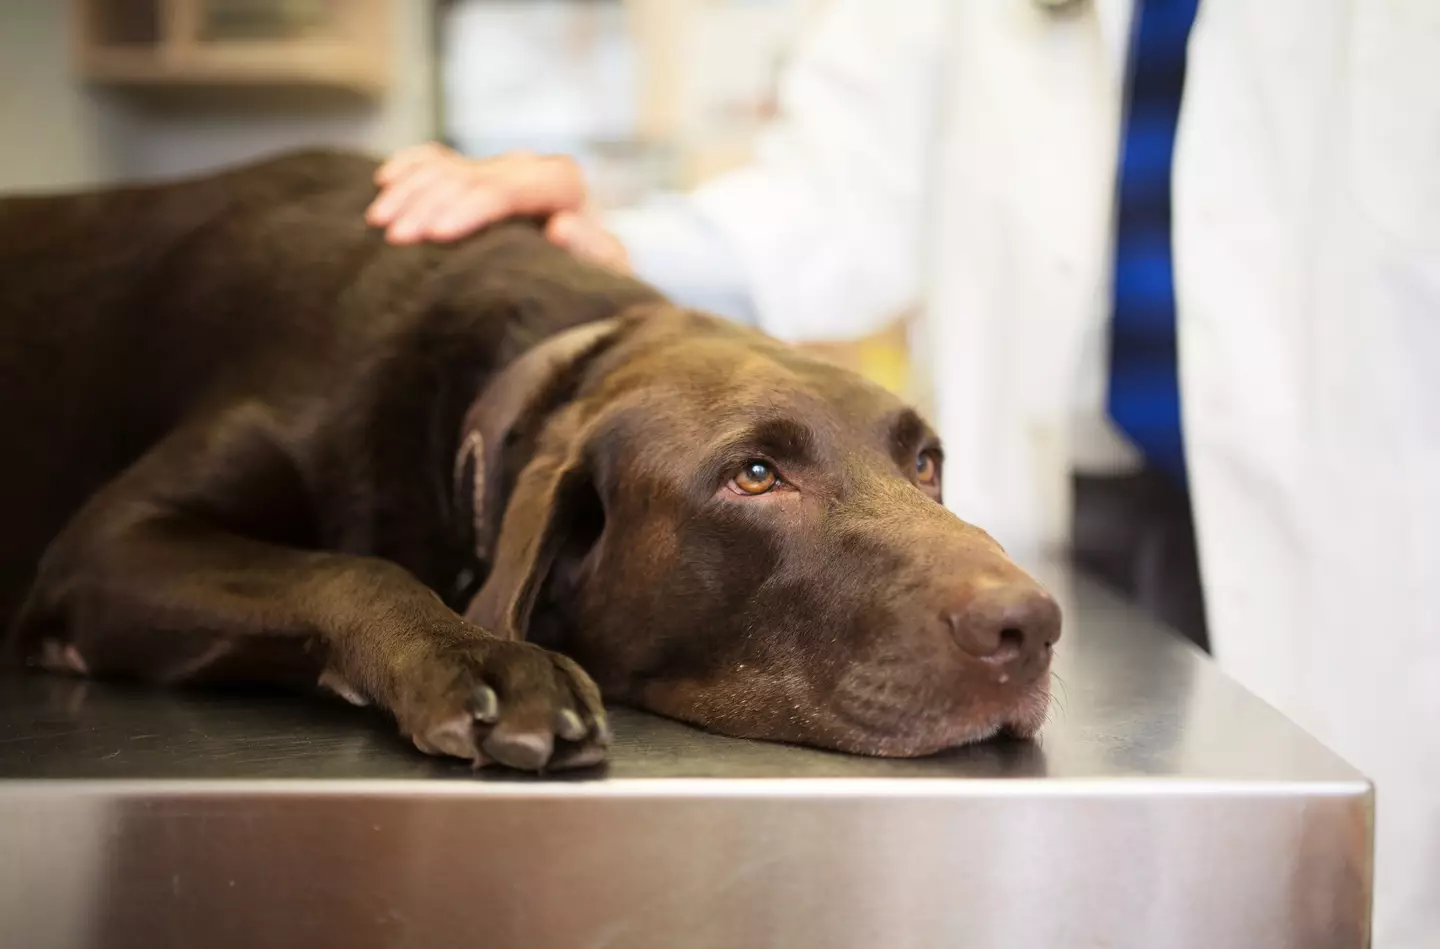 A pet expert shared signs your pet could be nearing the end of their life.